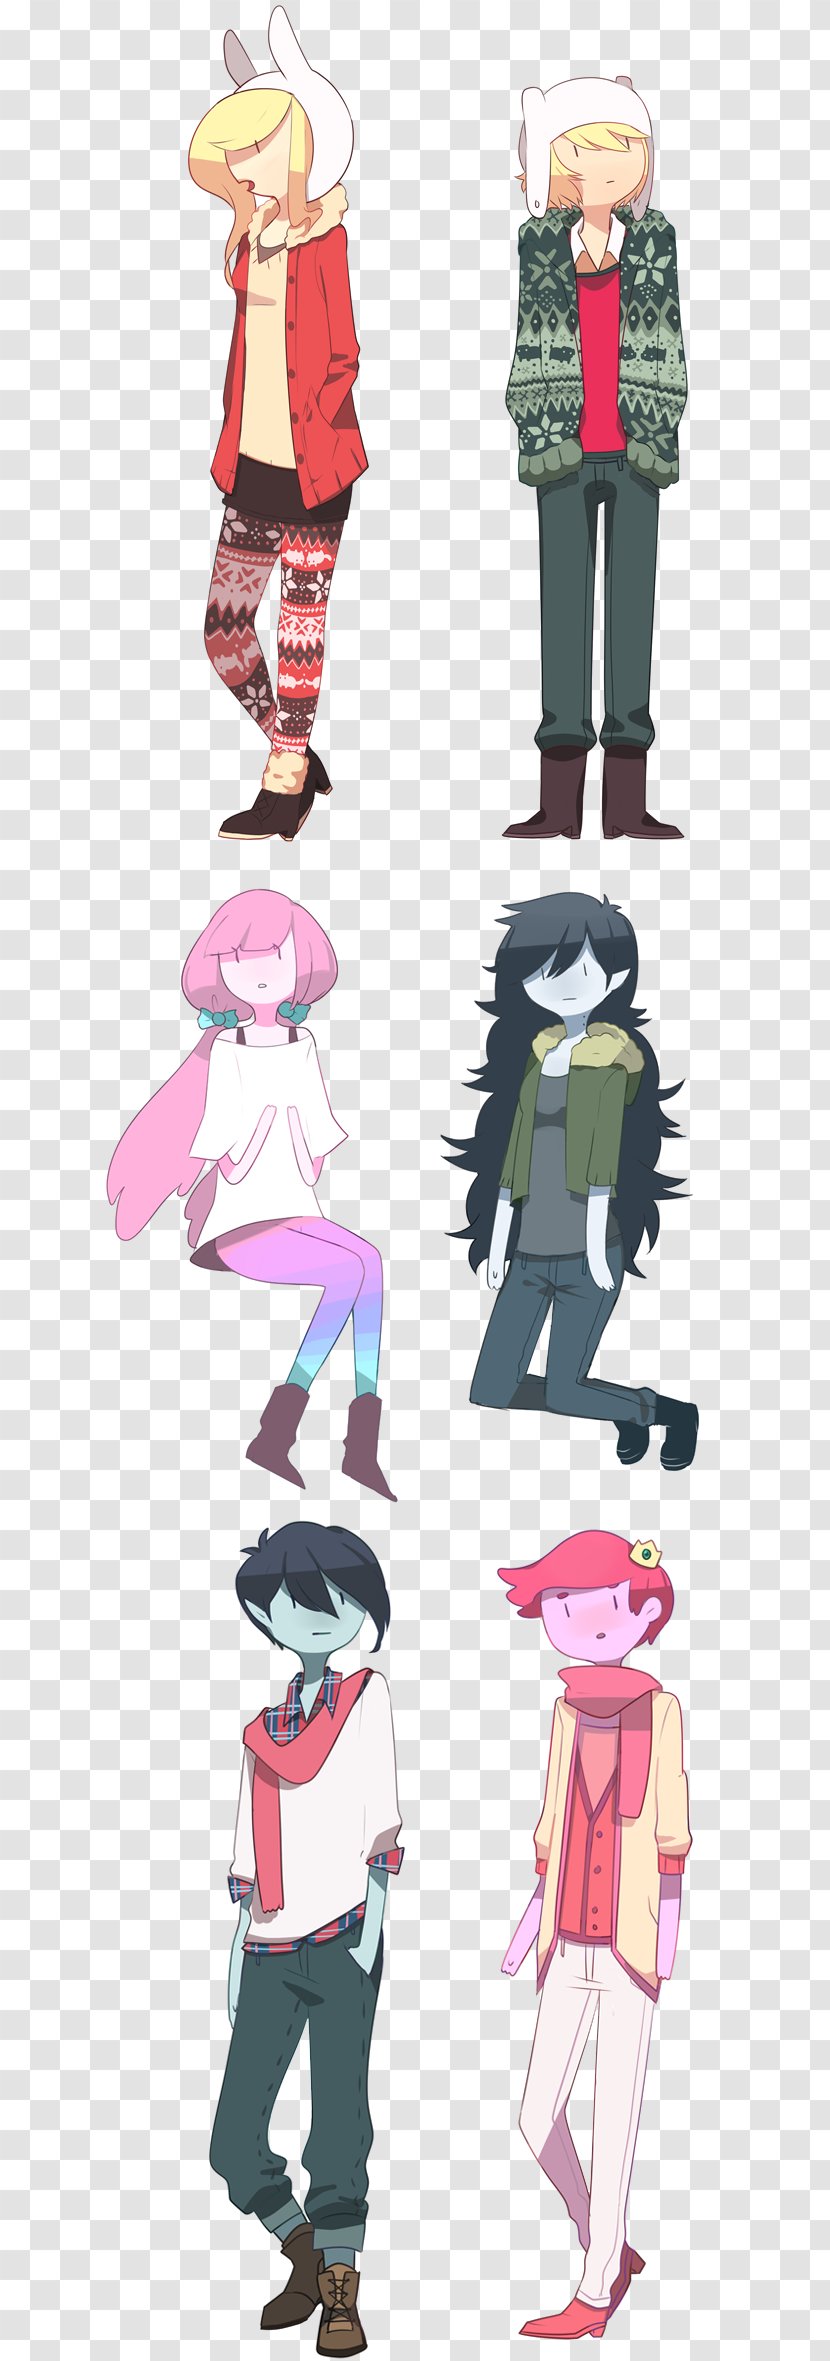 Finn The Human Marceline Vampire Queen Princess Bubblegum Ice King Fionna And Cake - Heart Transparent PNG